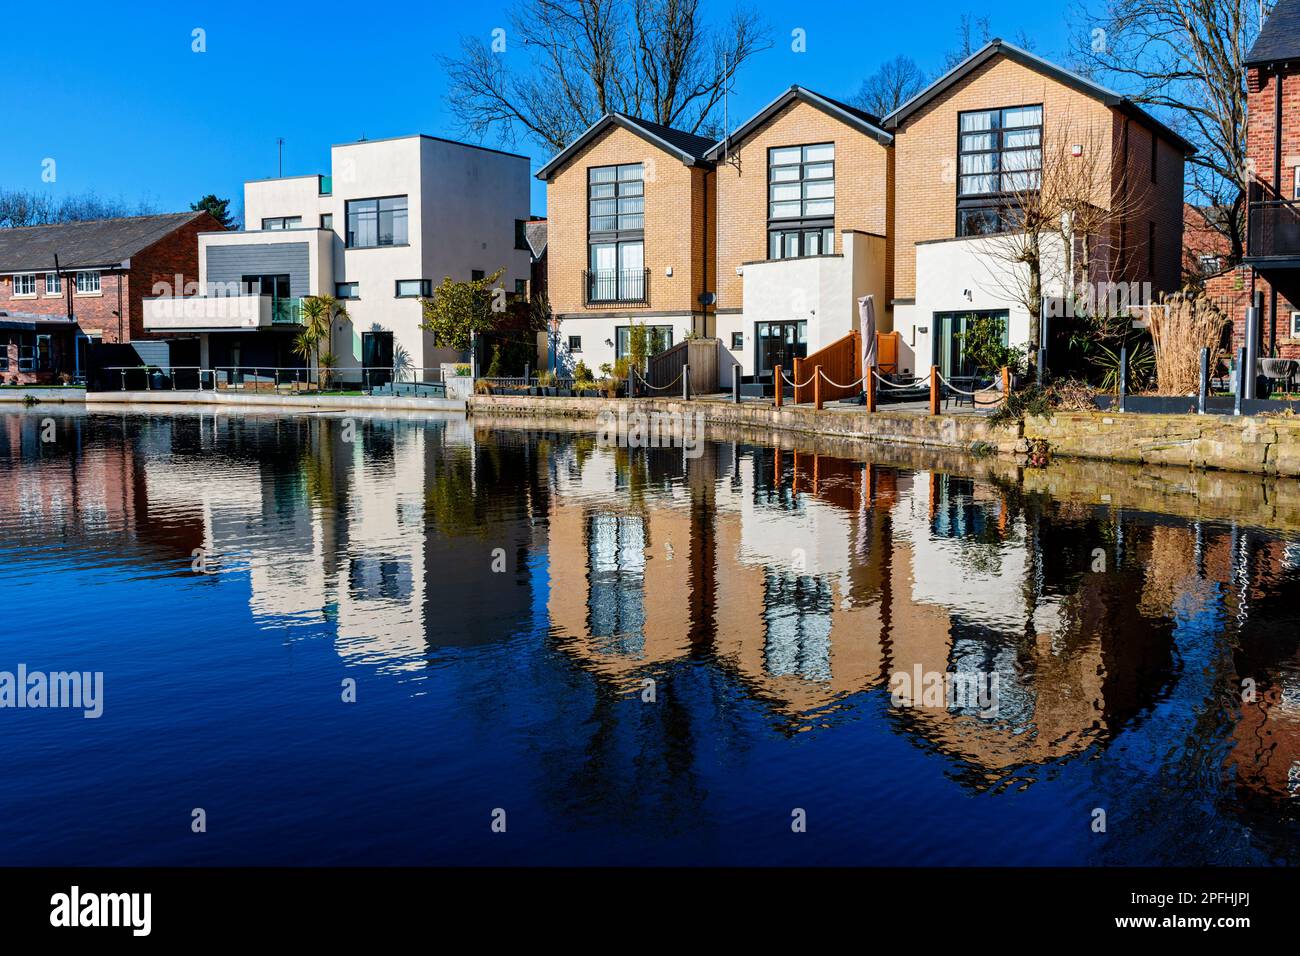 Modern houses reflected in the Ashton Canal, Audenshaw, Tameside, Manchester, England, UK.  The three on the right are called 'The Boatyard'. Stock Photo